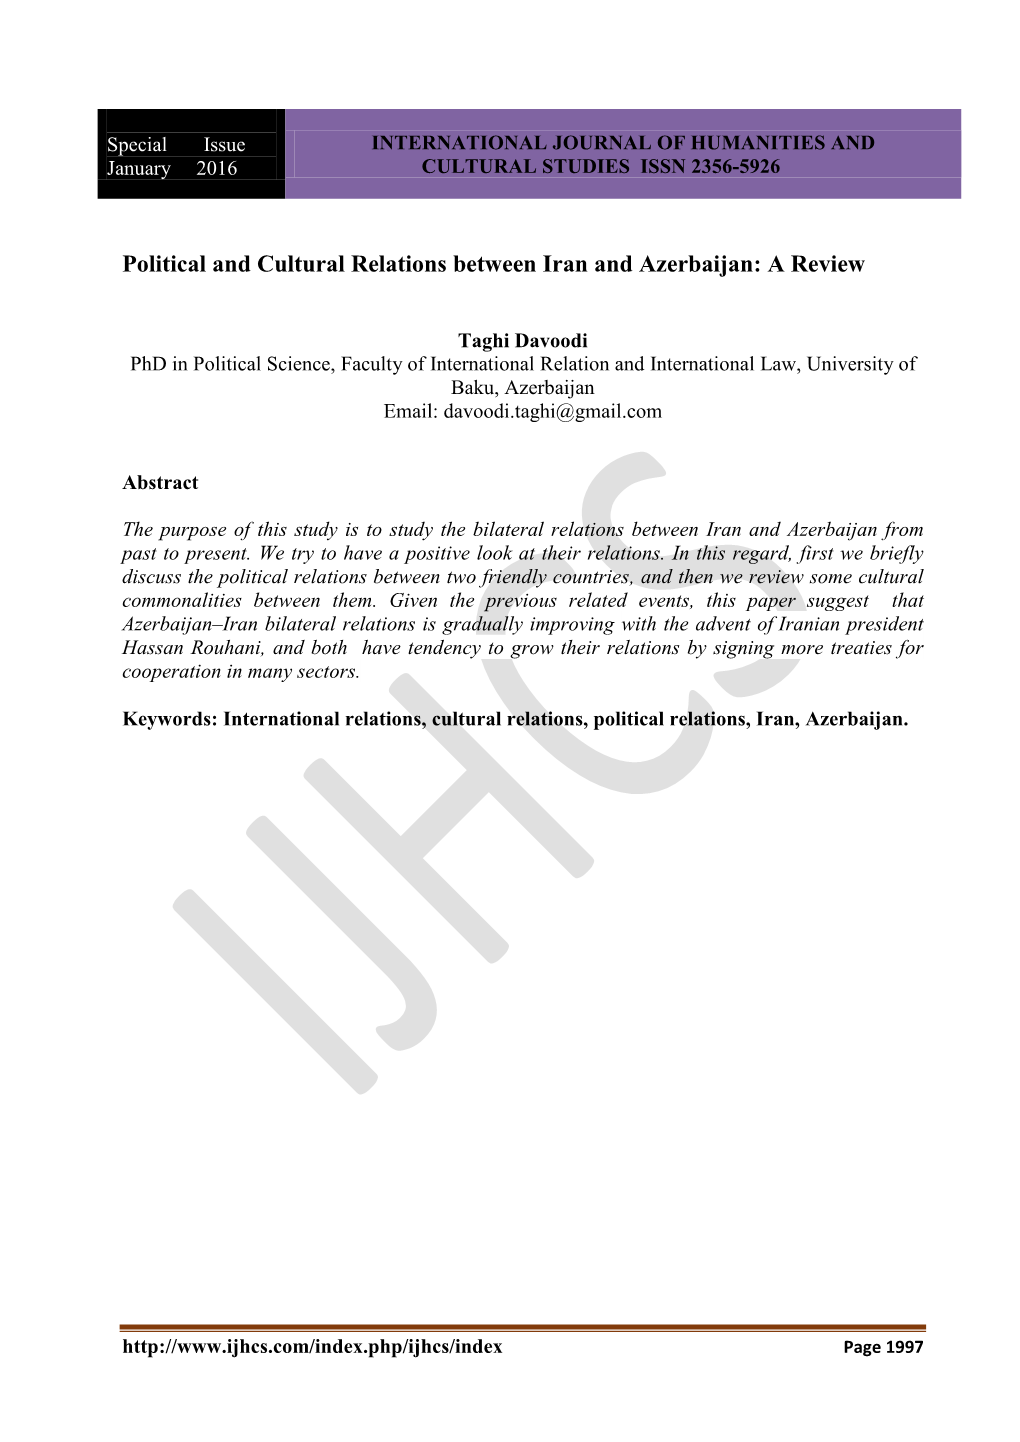 Political and Cultural Relations Between Iran and Azerbaijan: a Review